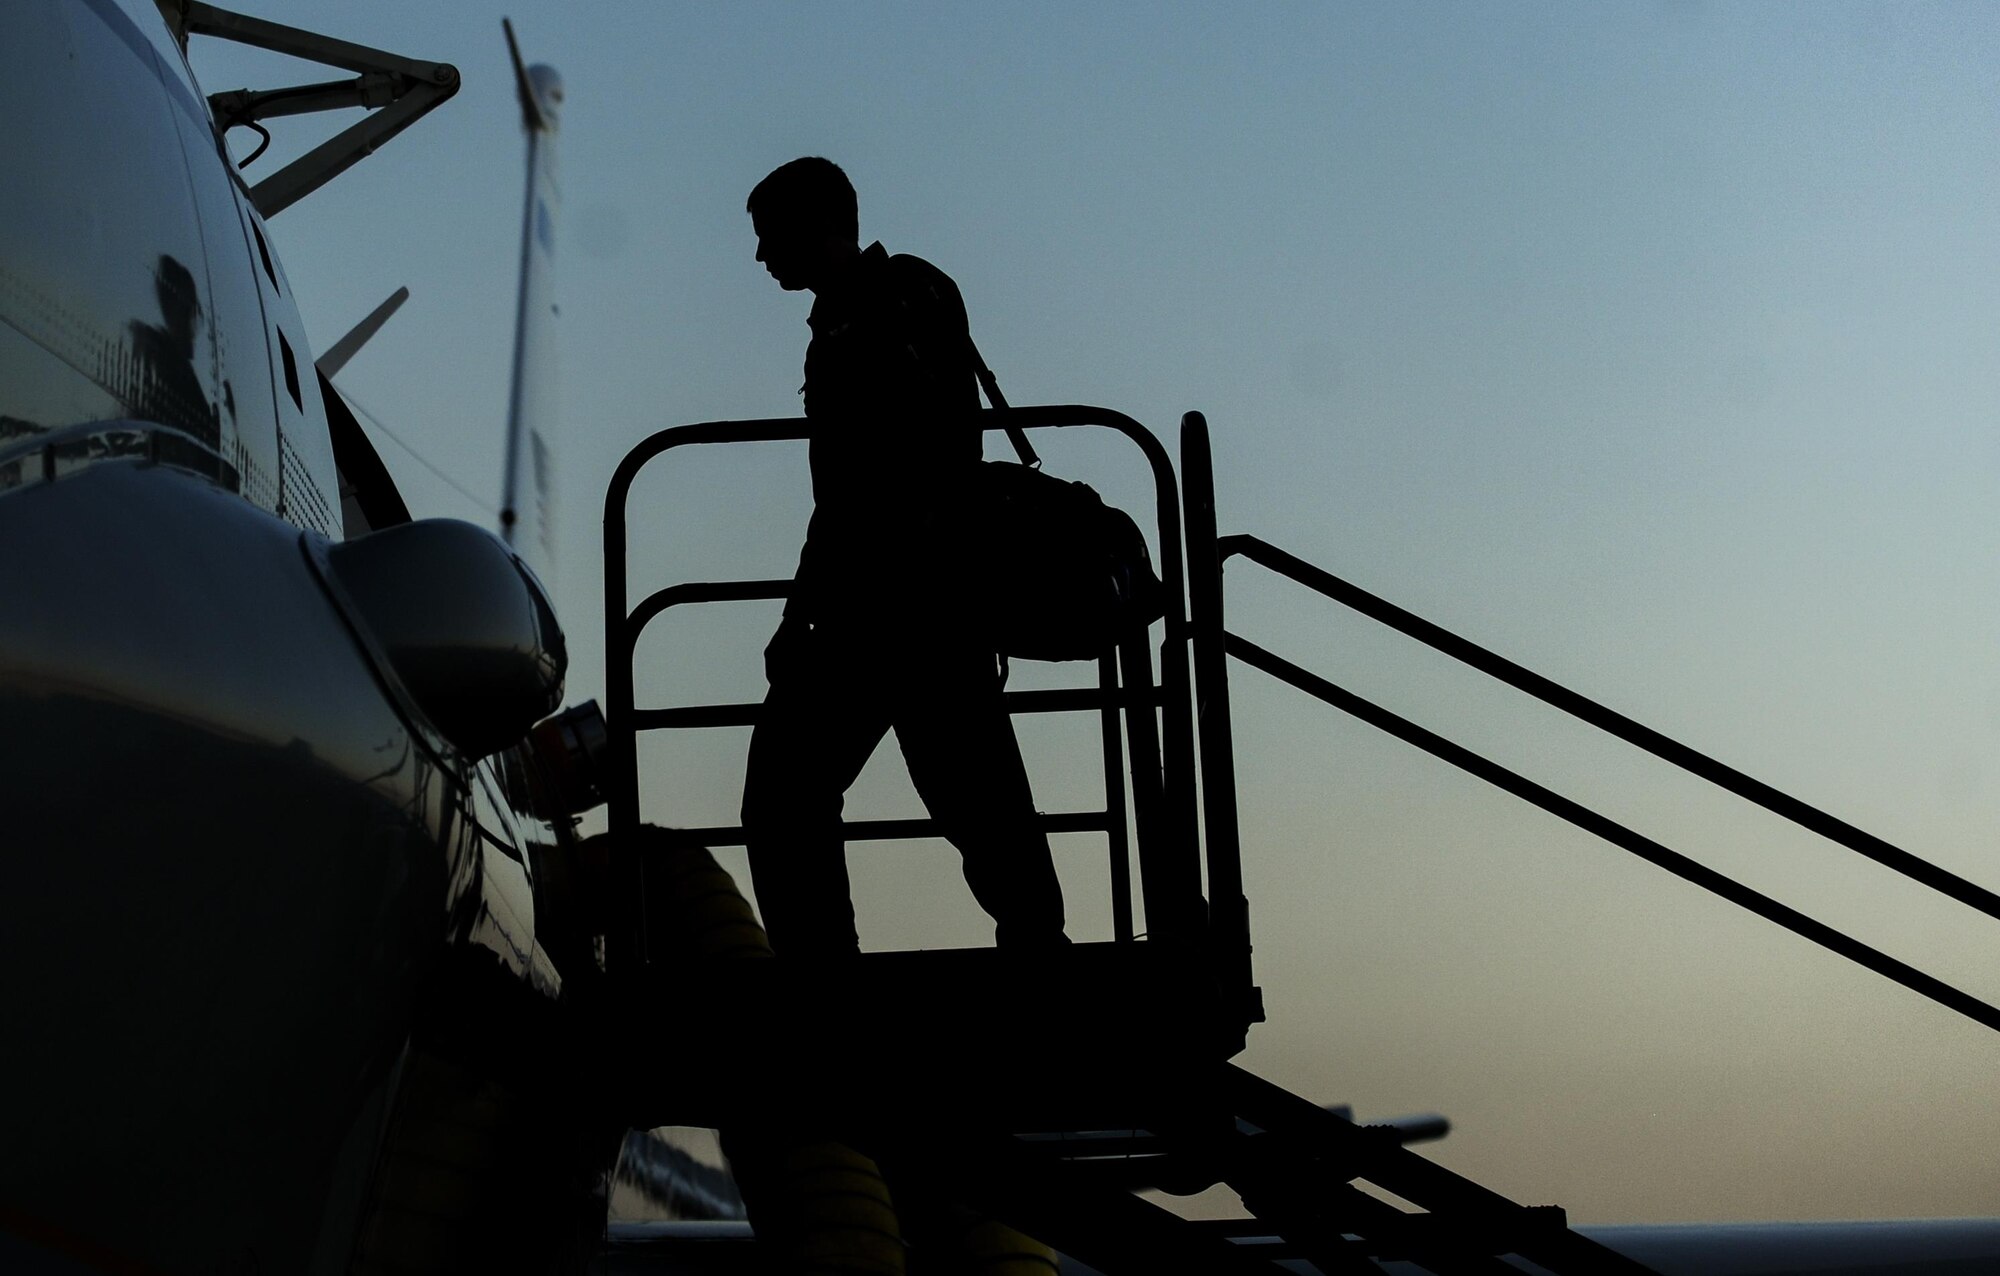 A pilot assigned to the 38th Reconnaissance Squadron Offutt Air Force Base, Neb., boards an RC-135 before night operations during Red Flag 16-3 at Nellis Air Force Base, Nev., July 26, 2016. Red Flag enhances aircrew’s combat readiness and survivability by challenging them with realistic combat scenarios. (U.S. Air Force photo by Airman 1st Class Kevin Tanenbaum/Released)  